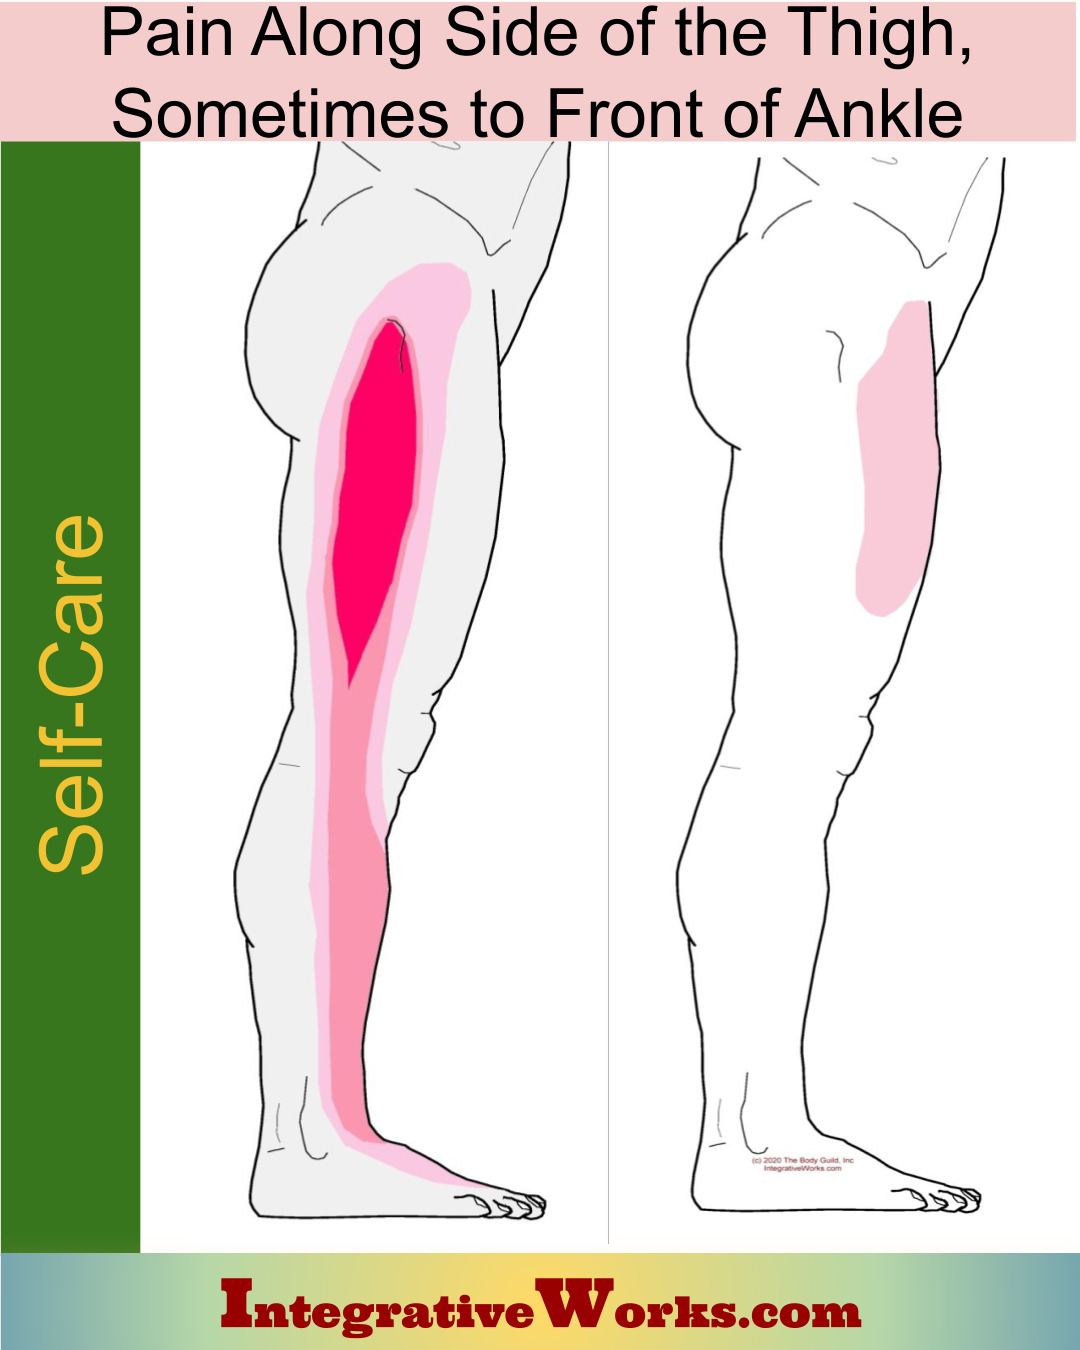 Self Care – Tensor Fascia Lata – Pain or tingling along side of the thigh